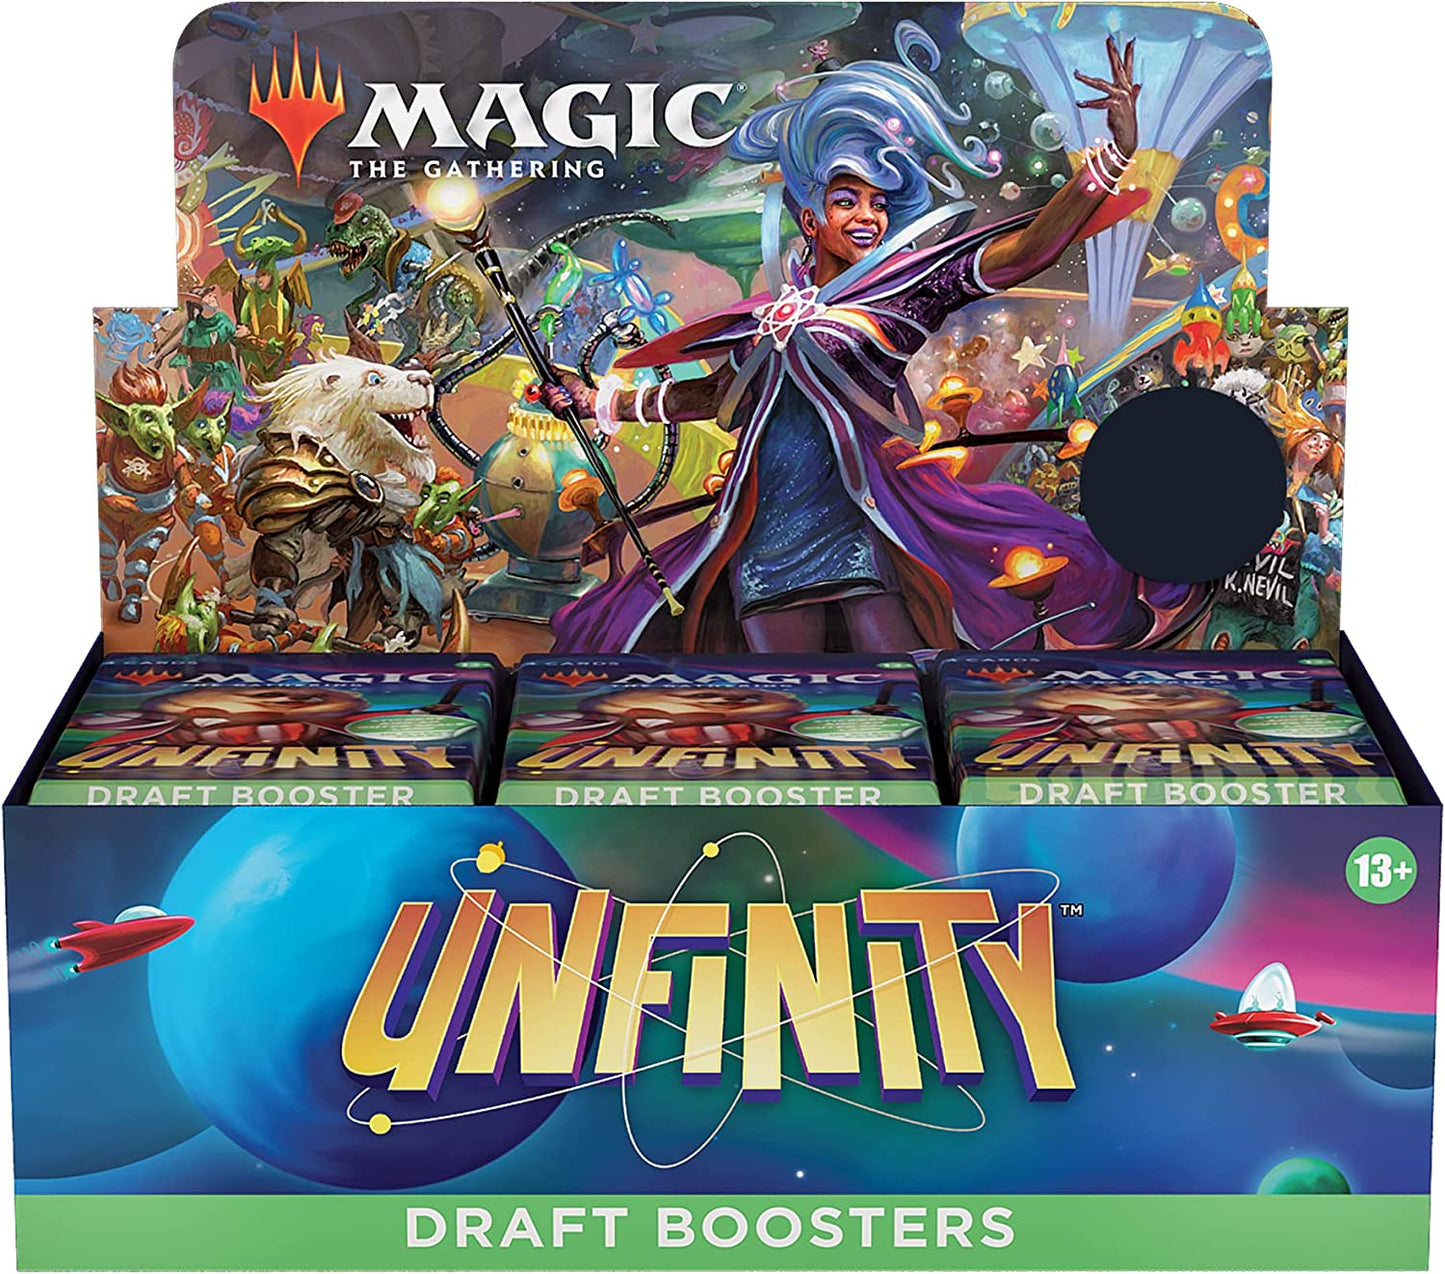 Magic: The Gathering Draft Booster Box Case - Unfinity (Case of 6)